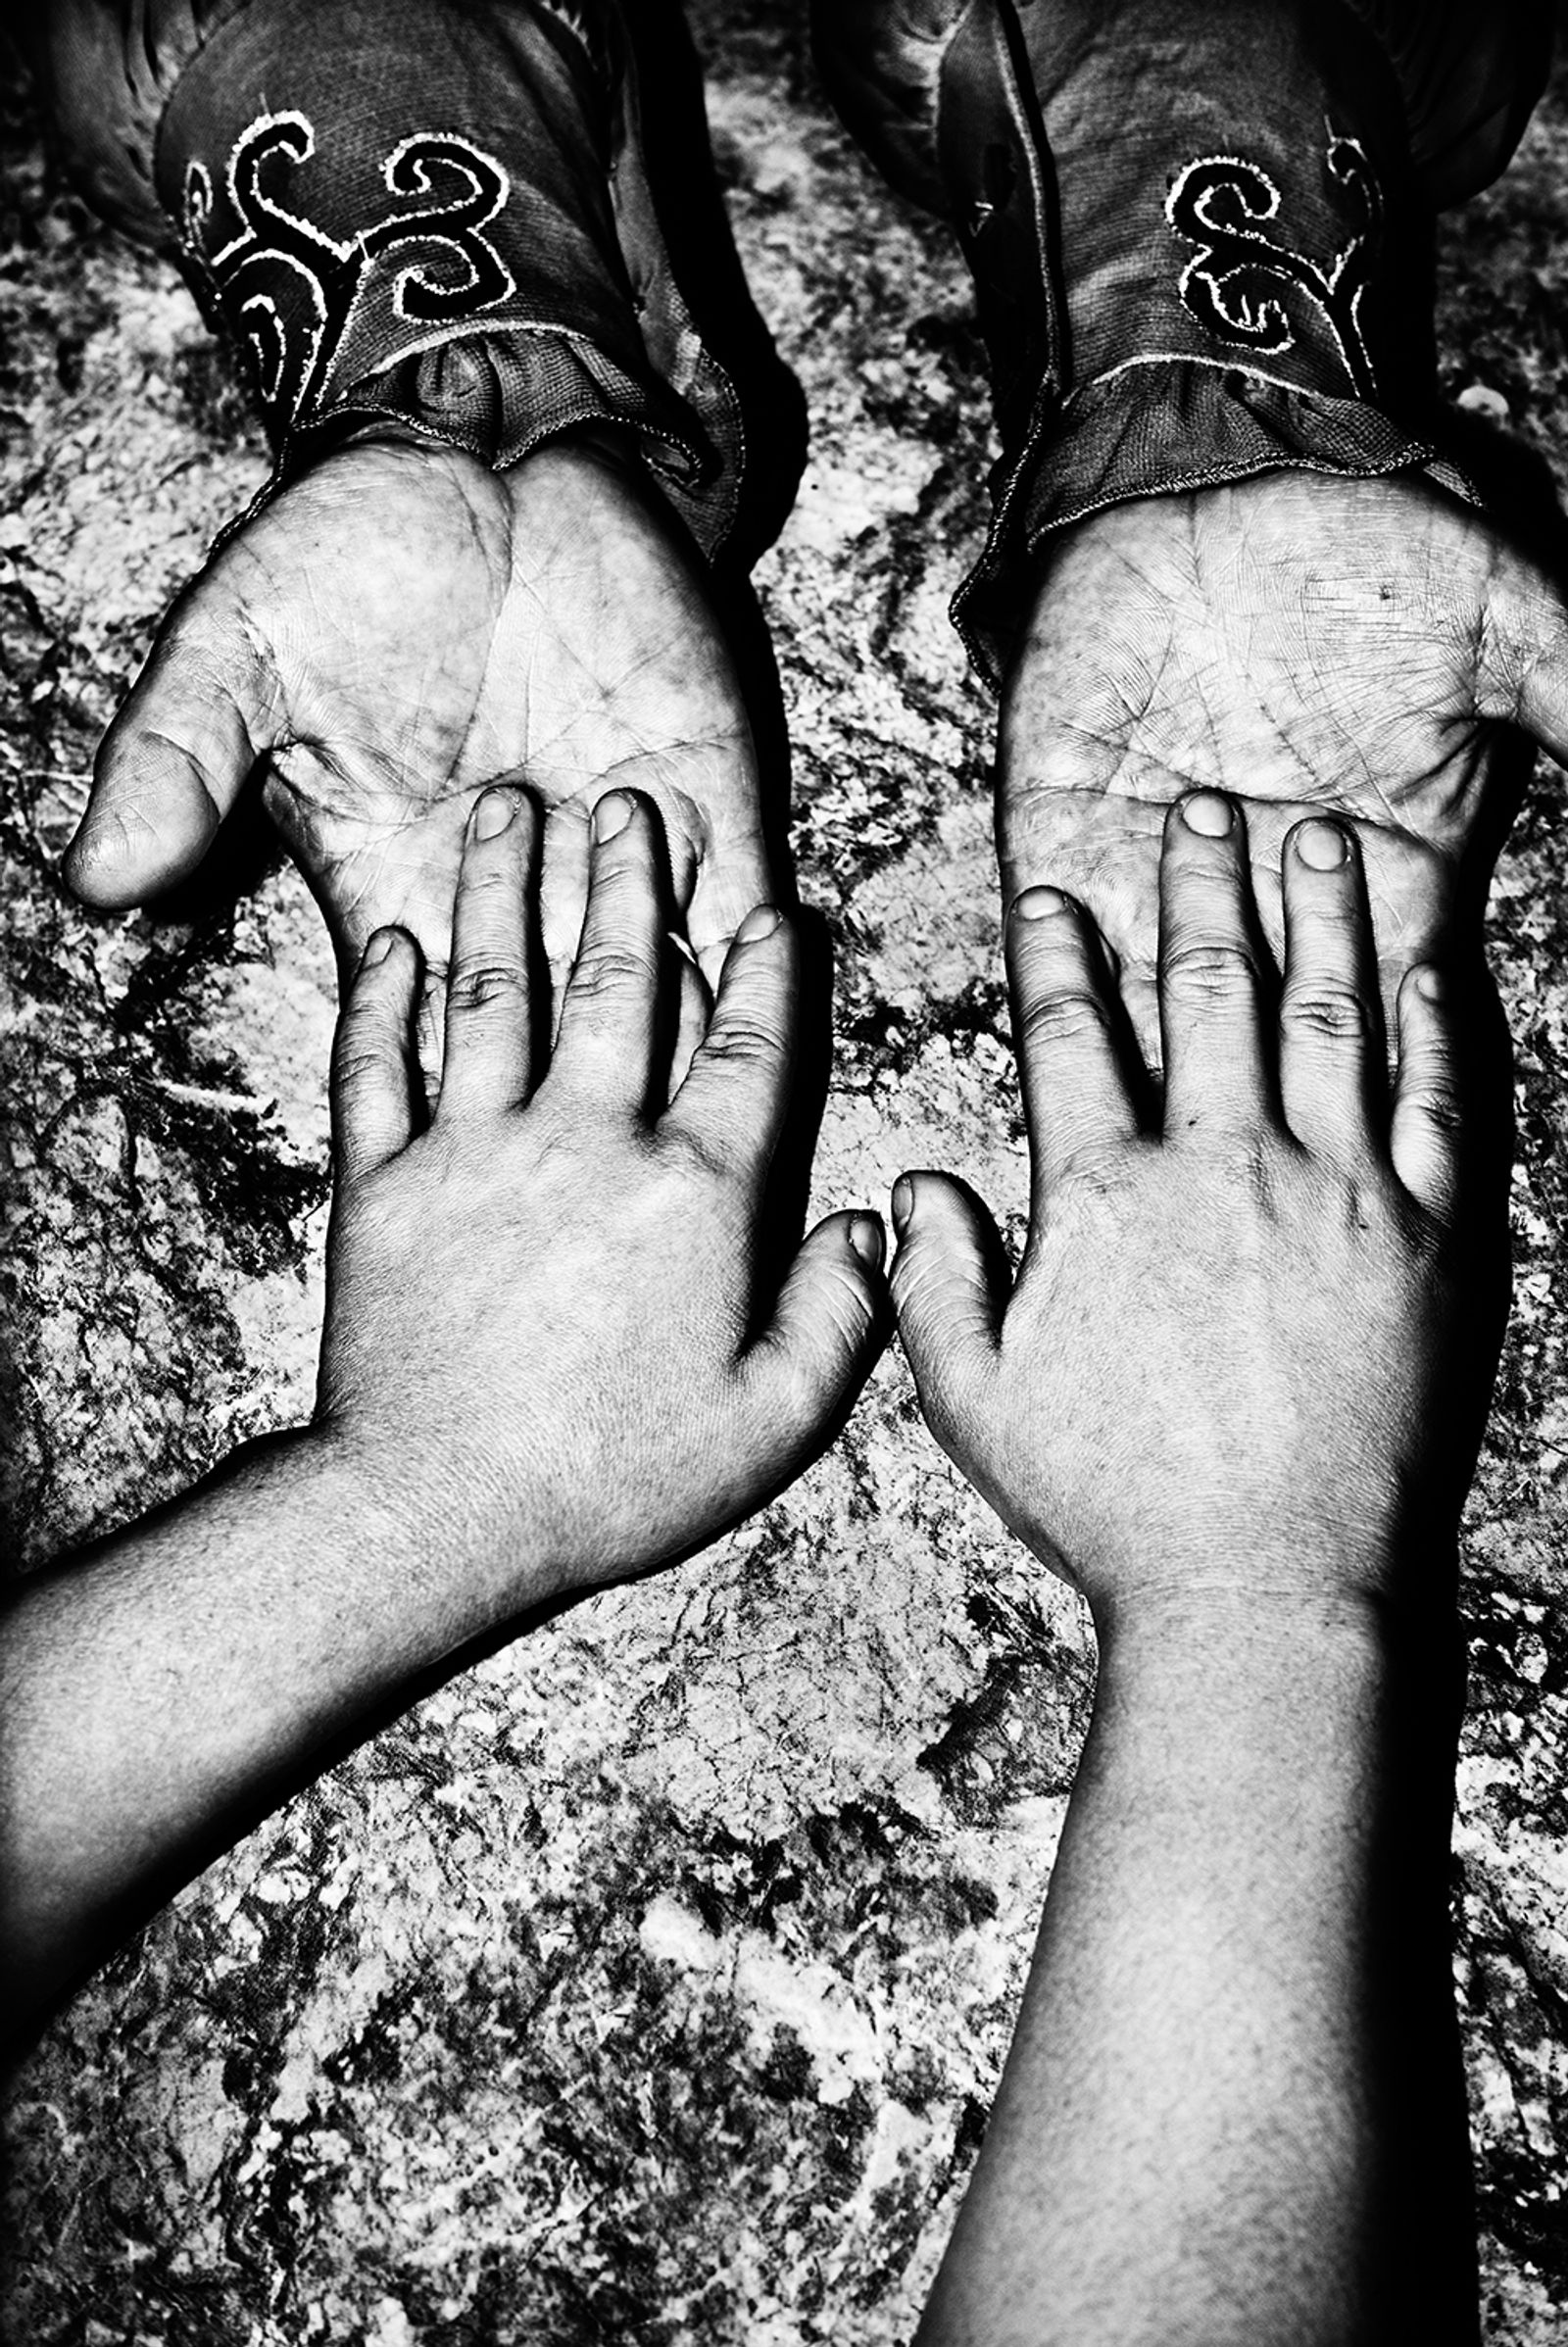 © Jacob Aue Sobol - Image from the Road of bones photography project